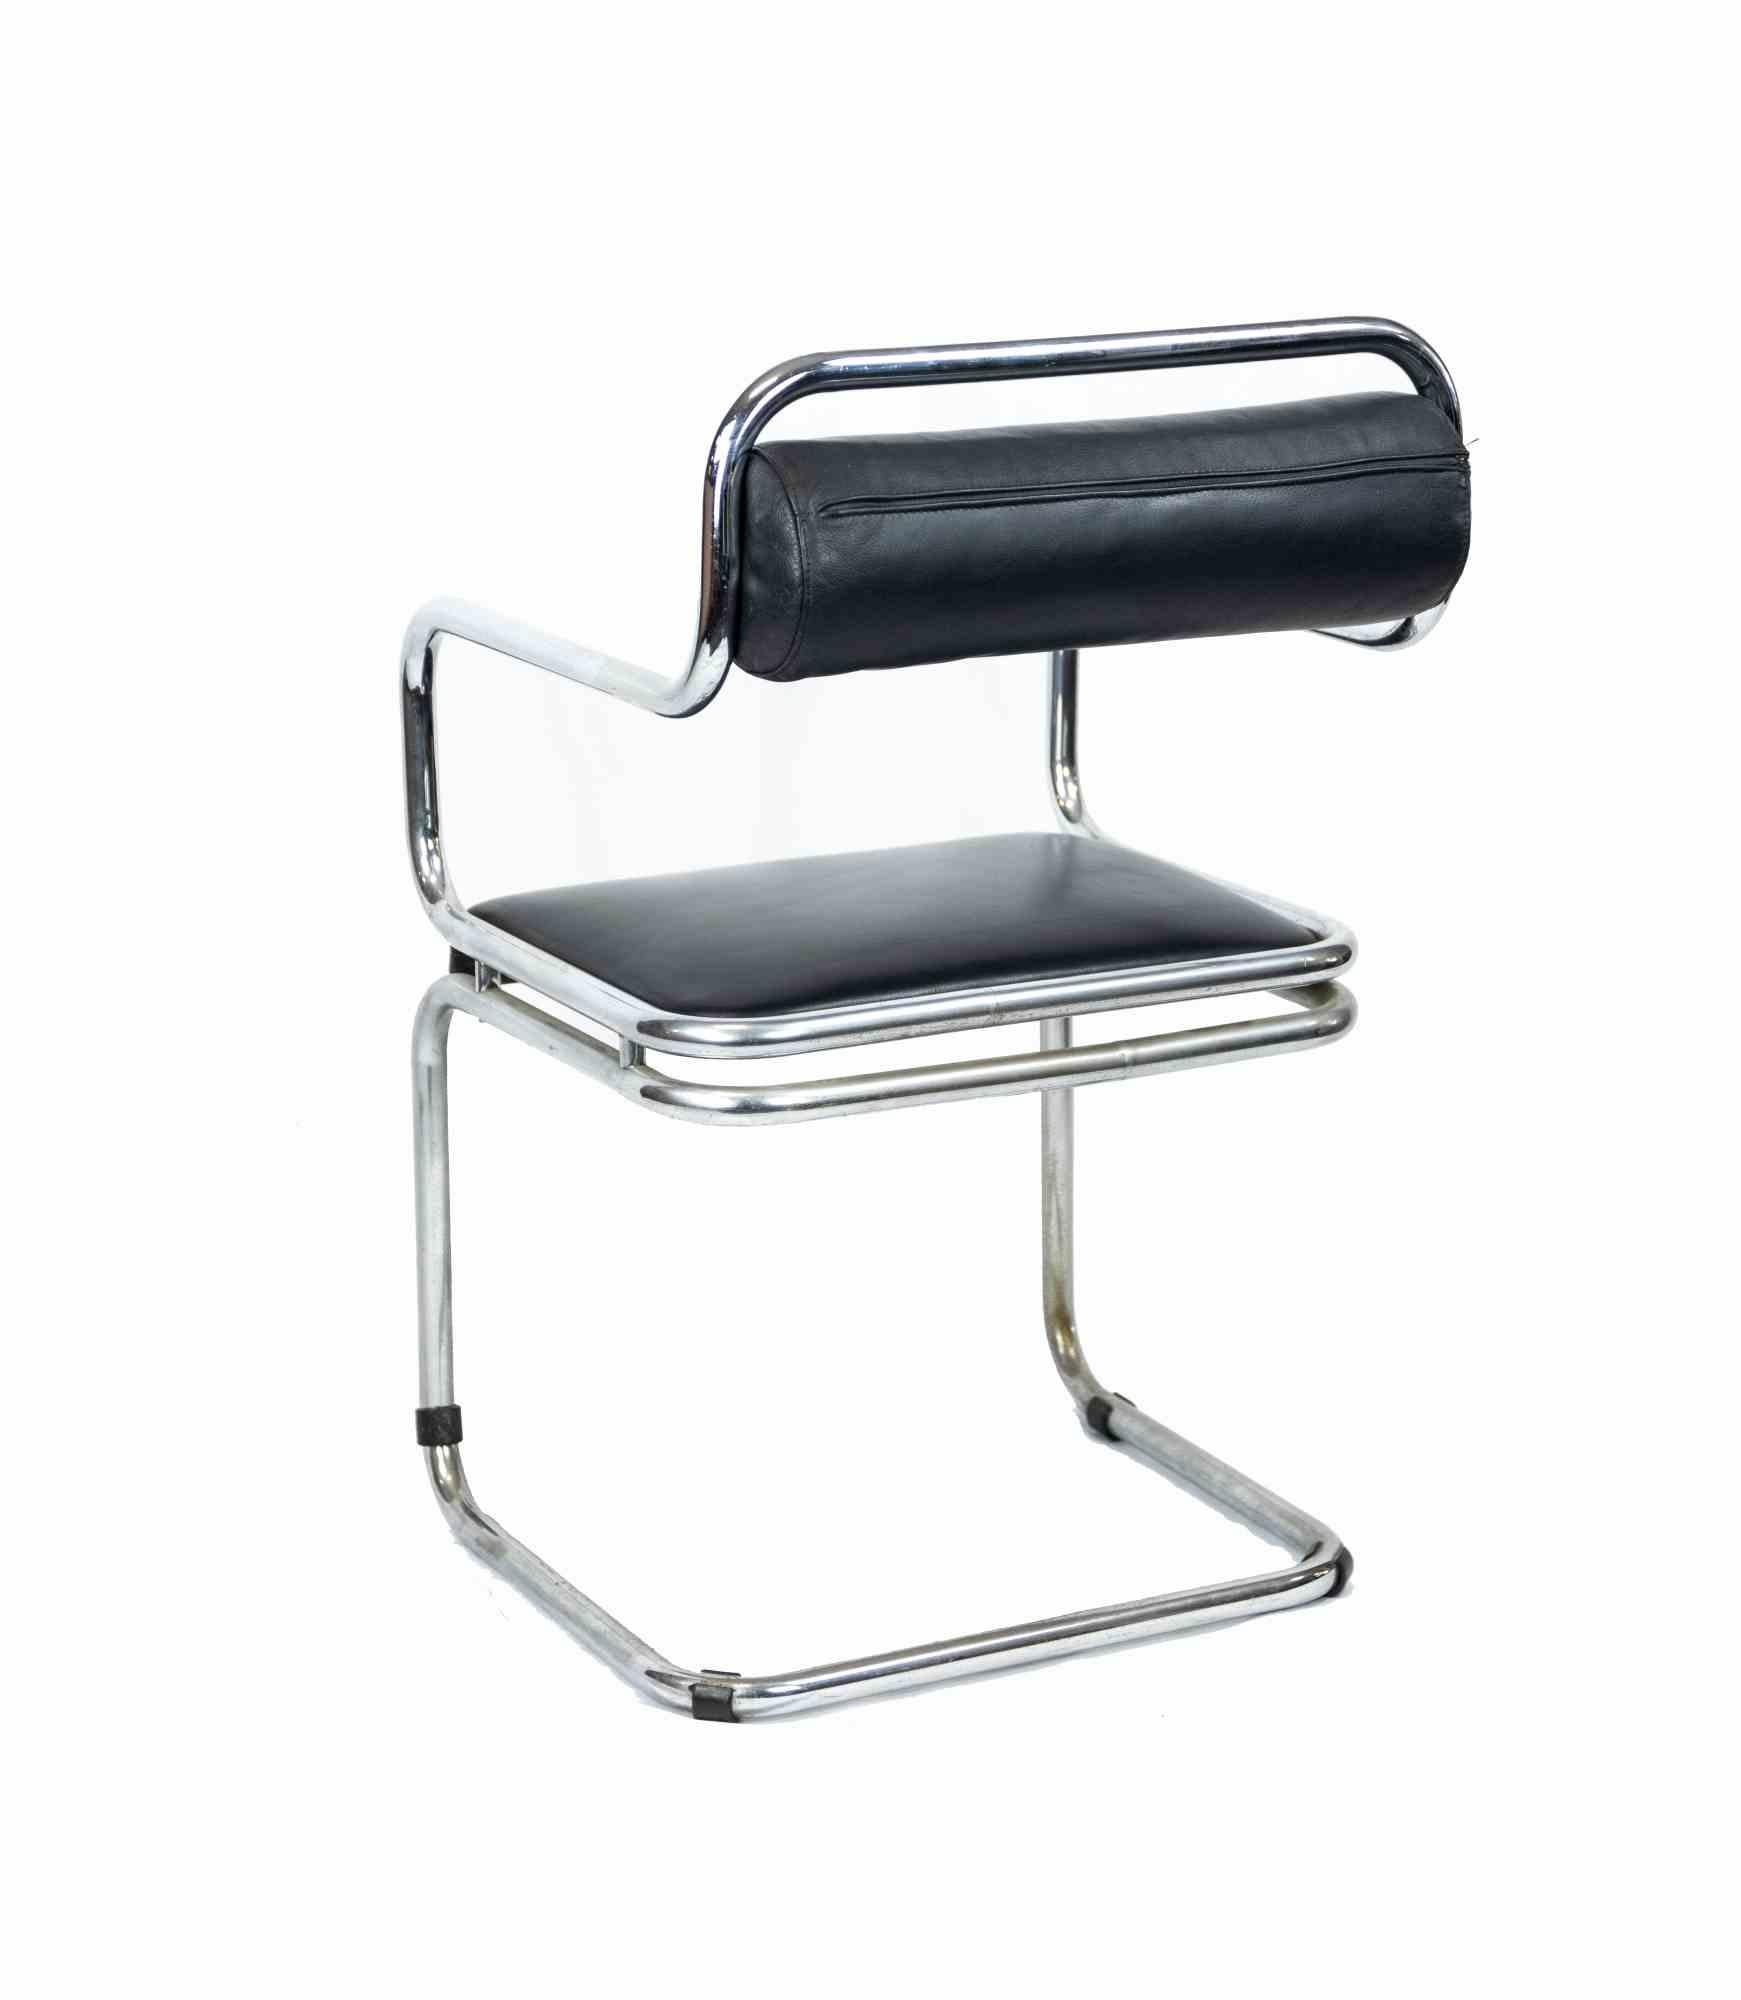 Cassina chairs set is an elegant set realized by Cassina in the 1970s.

An icon of design world this set is made up of six chairs. Entirely realized in black leather and steel.

Mint conditions.

Dimensions: 87 x 52 x 58 cm; weight 10 kg (each